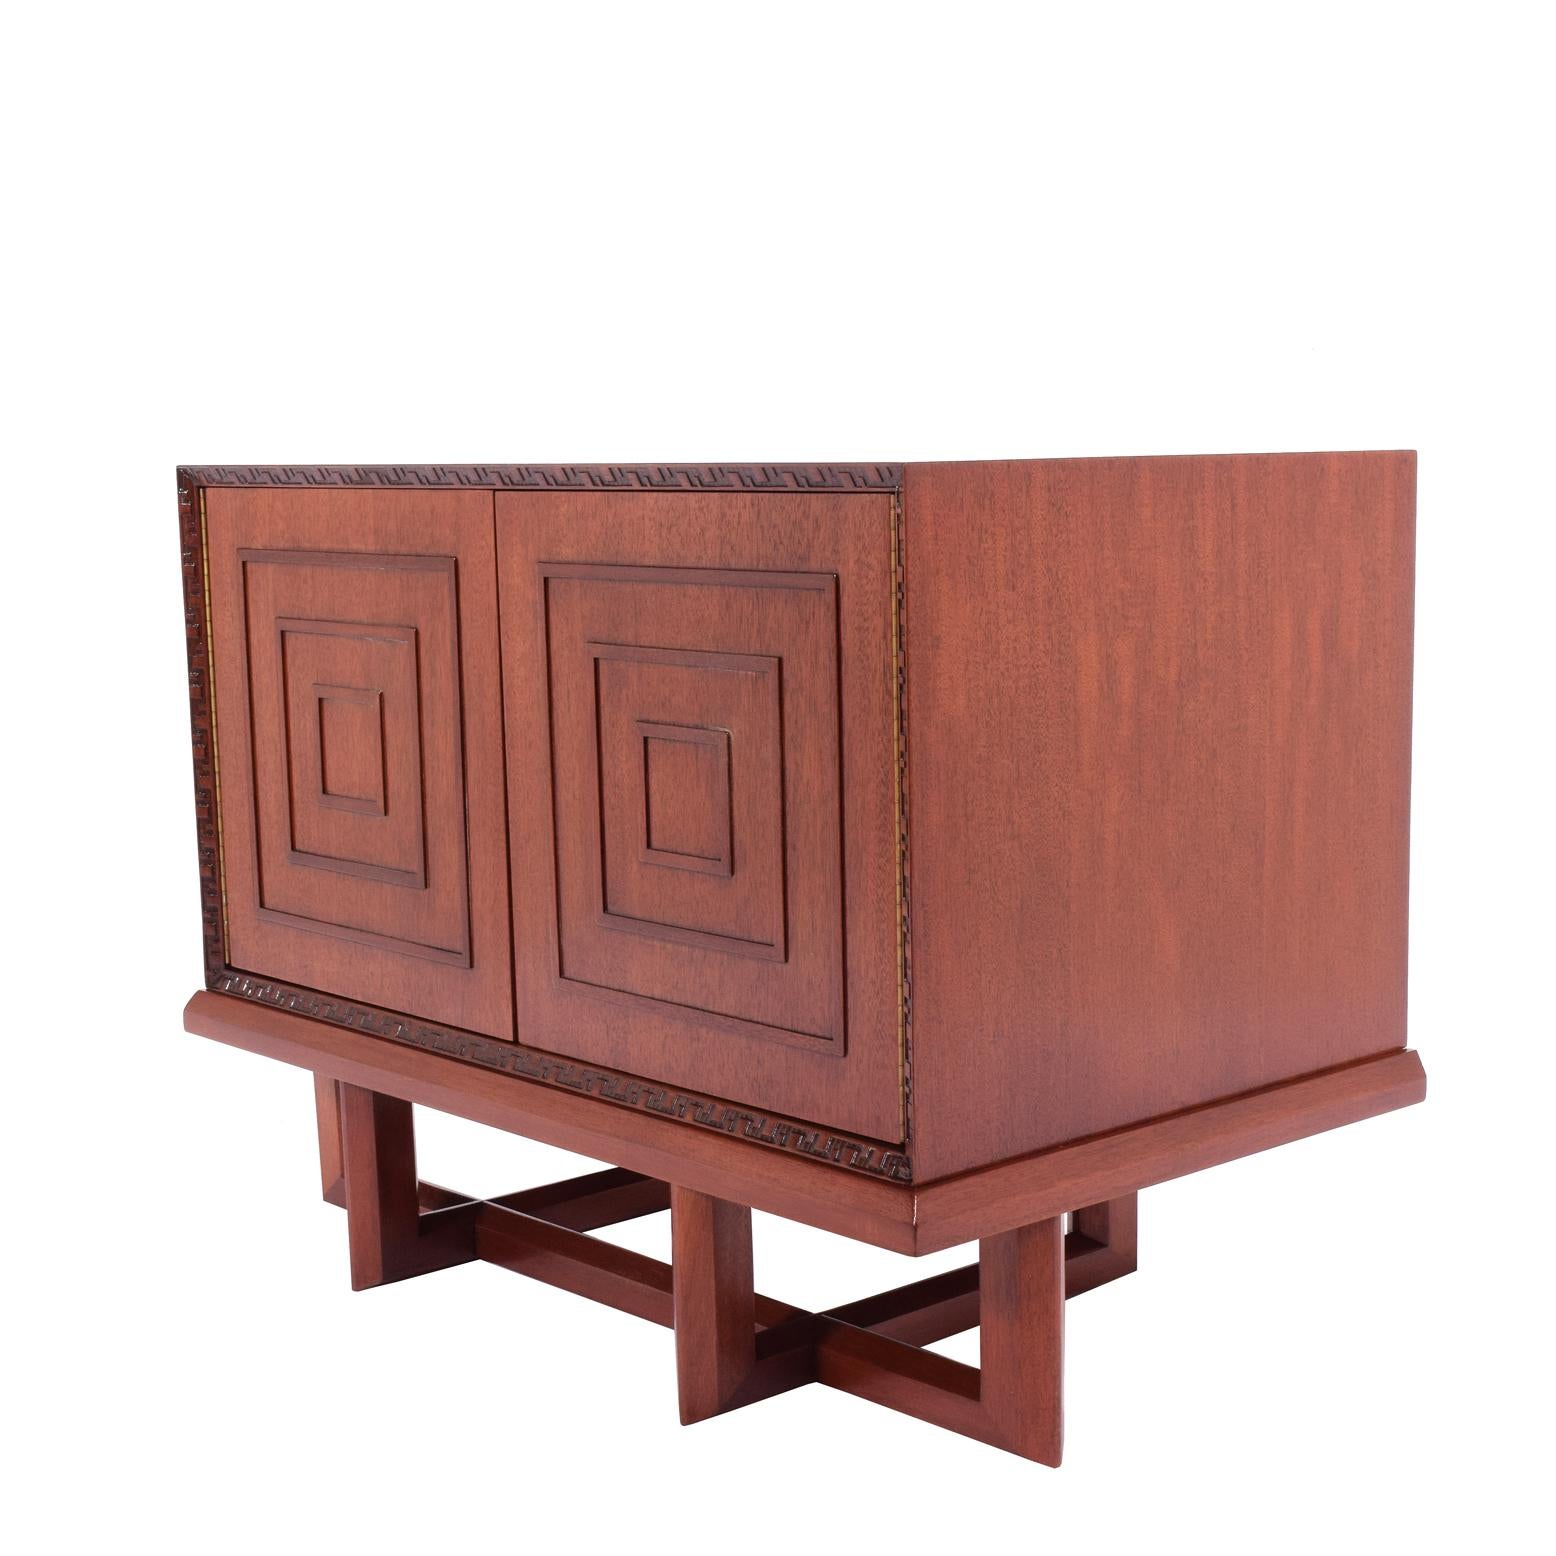 Two-door cabinet with one adjustable shelf design by Frank Lloyd Wright # 2005 in 1955 for Heritage Henredon, stamp in red inc on the back.